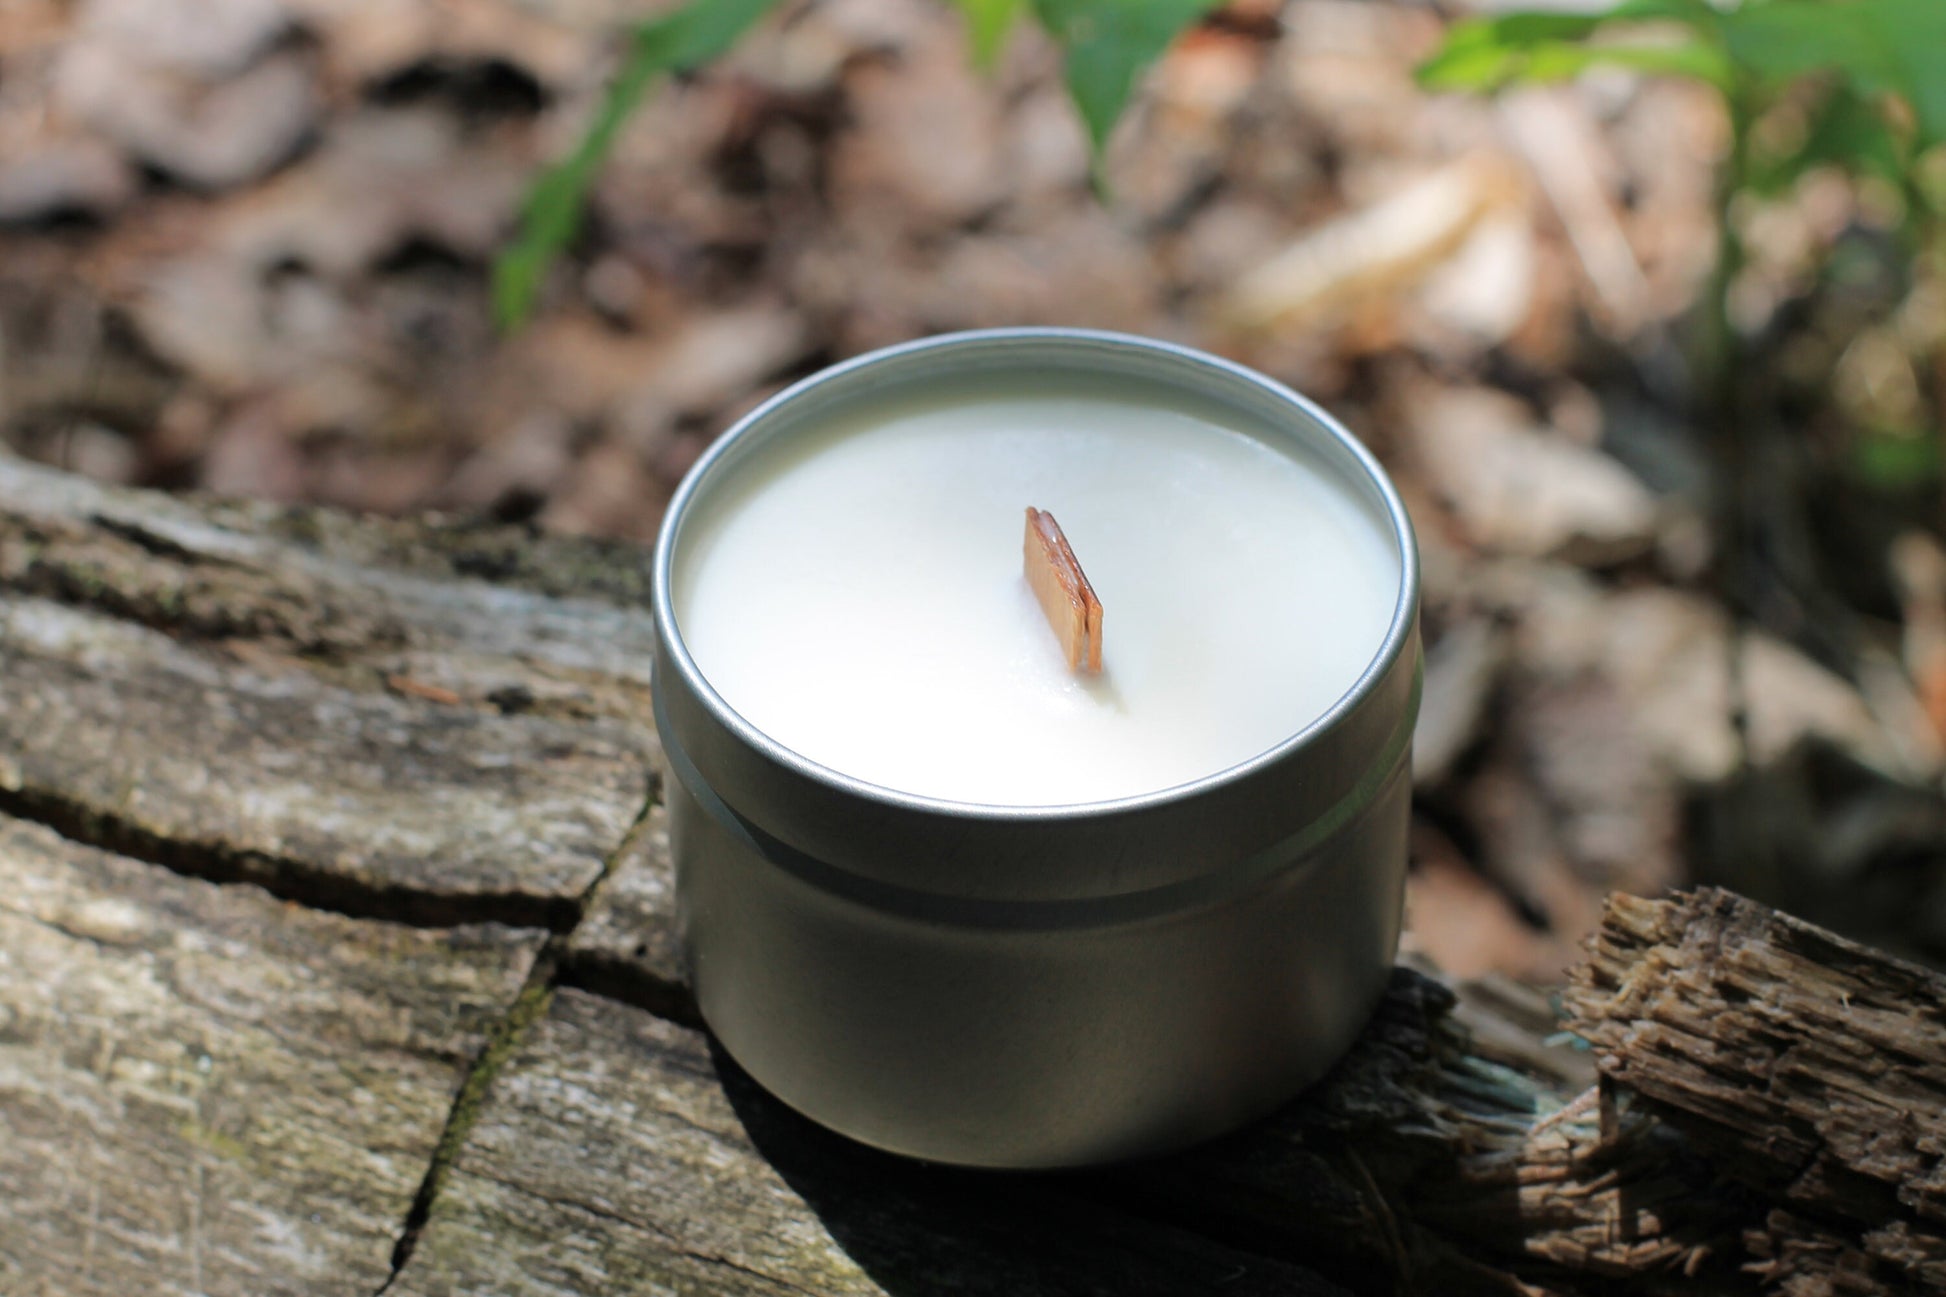 Camper Candle, Citronella Candle, Stop Bugging Me, Wood Wick Candle Tin, Vermont Travel Candle